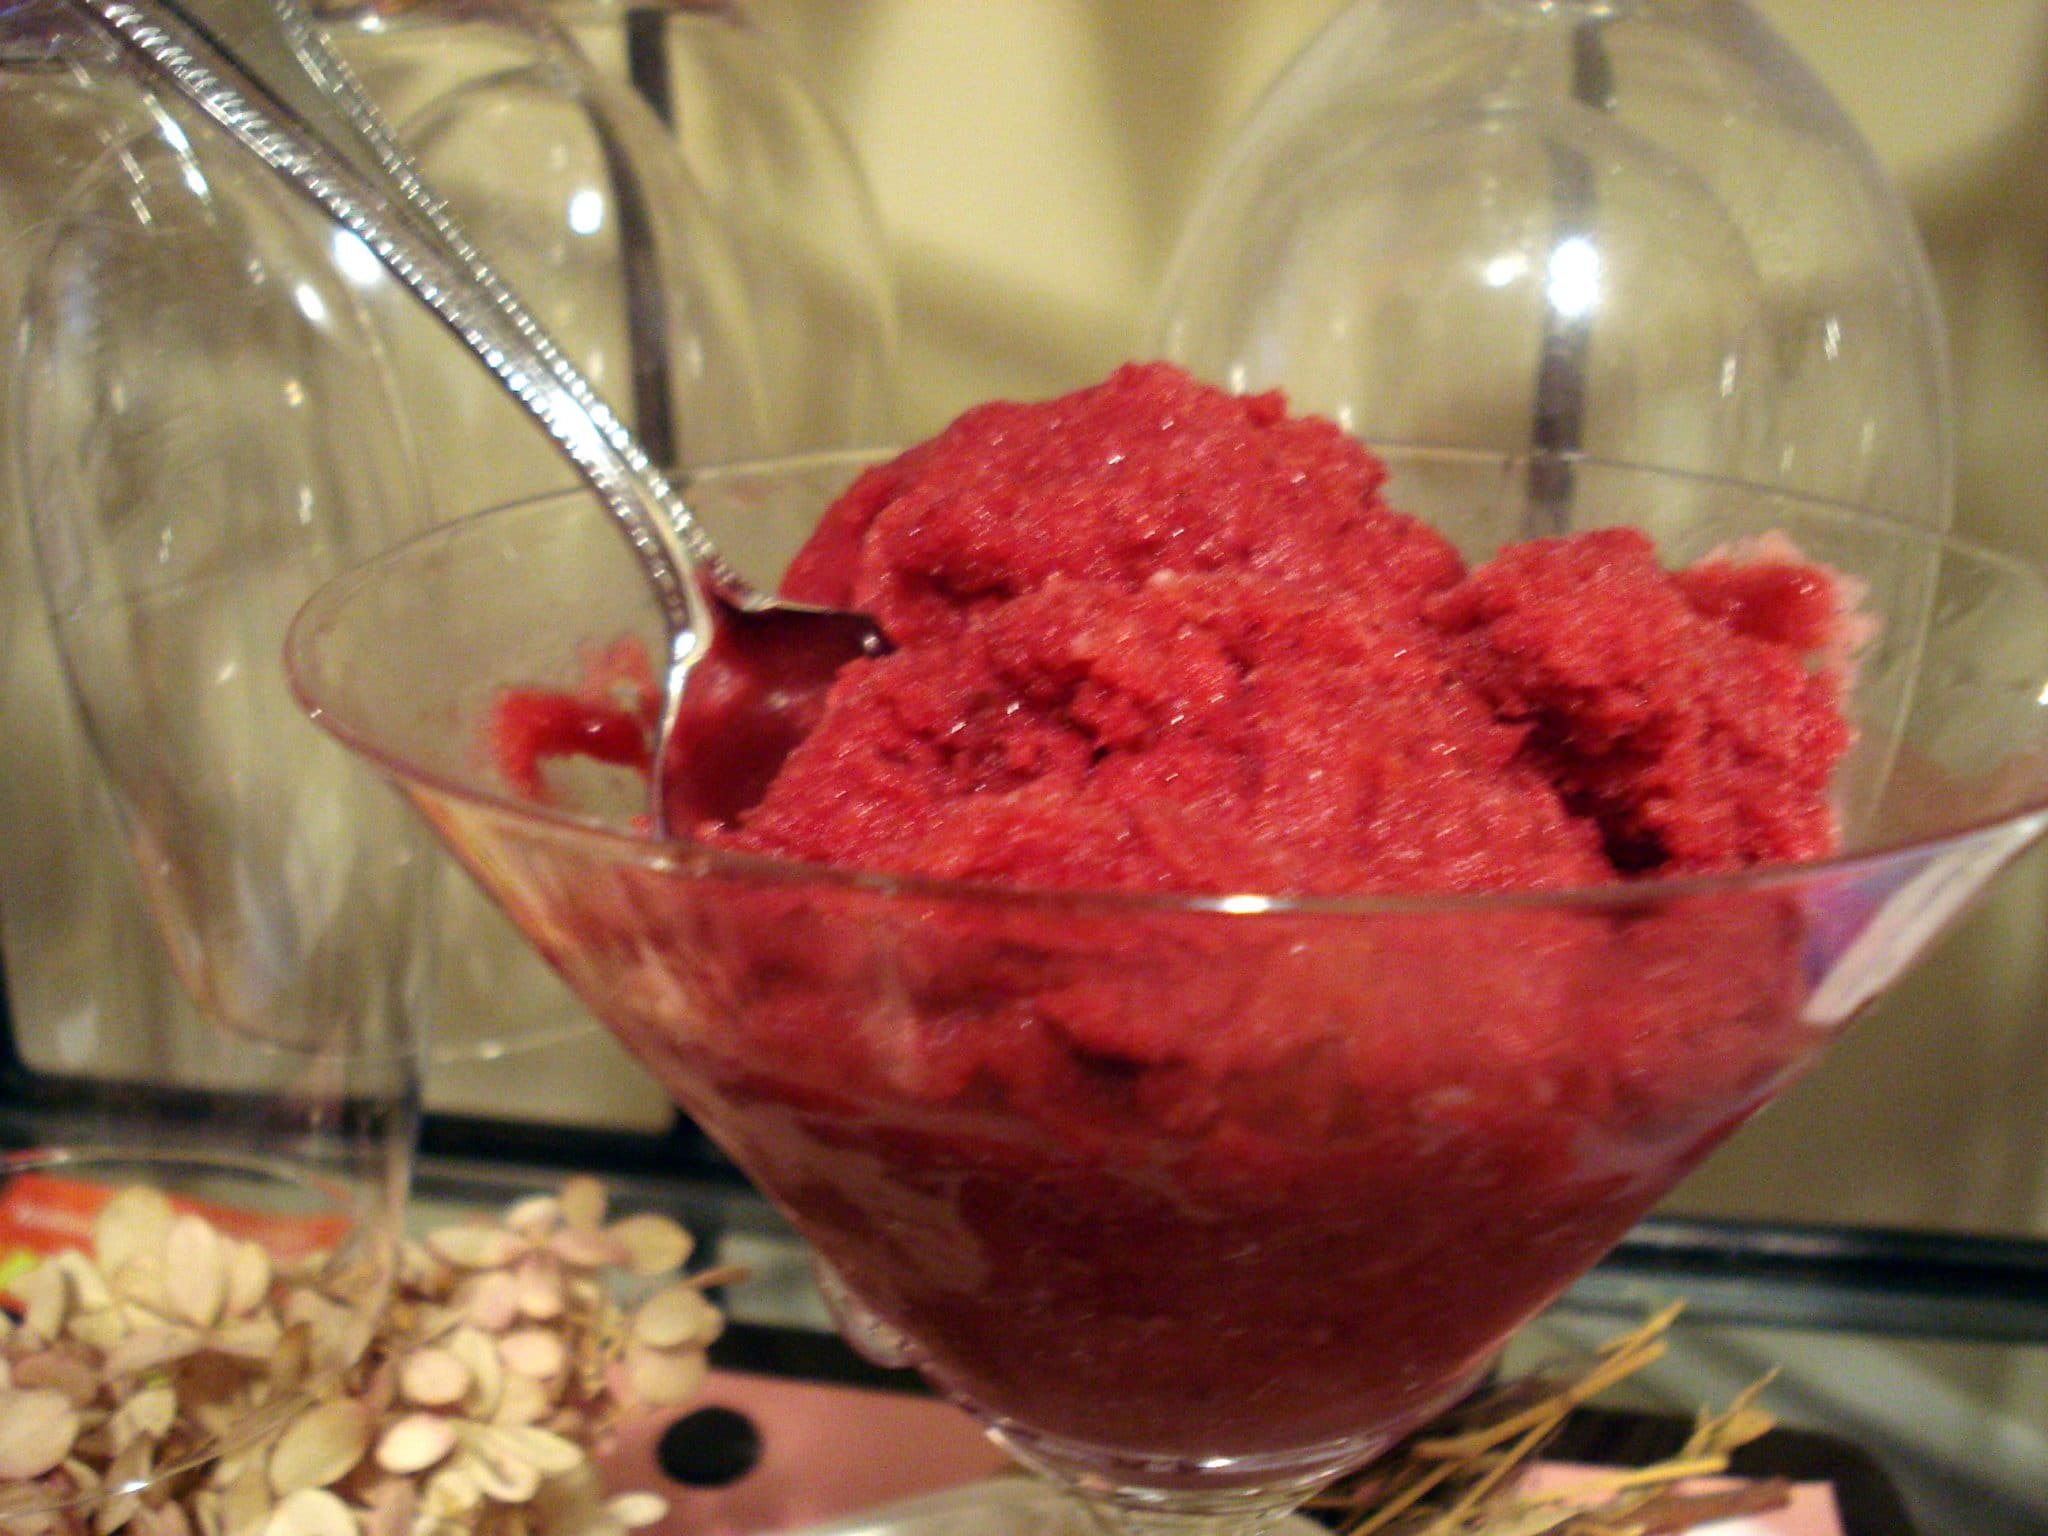 Close up of martini glass with merlot sorbet